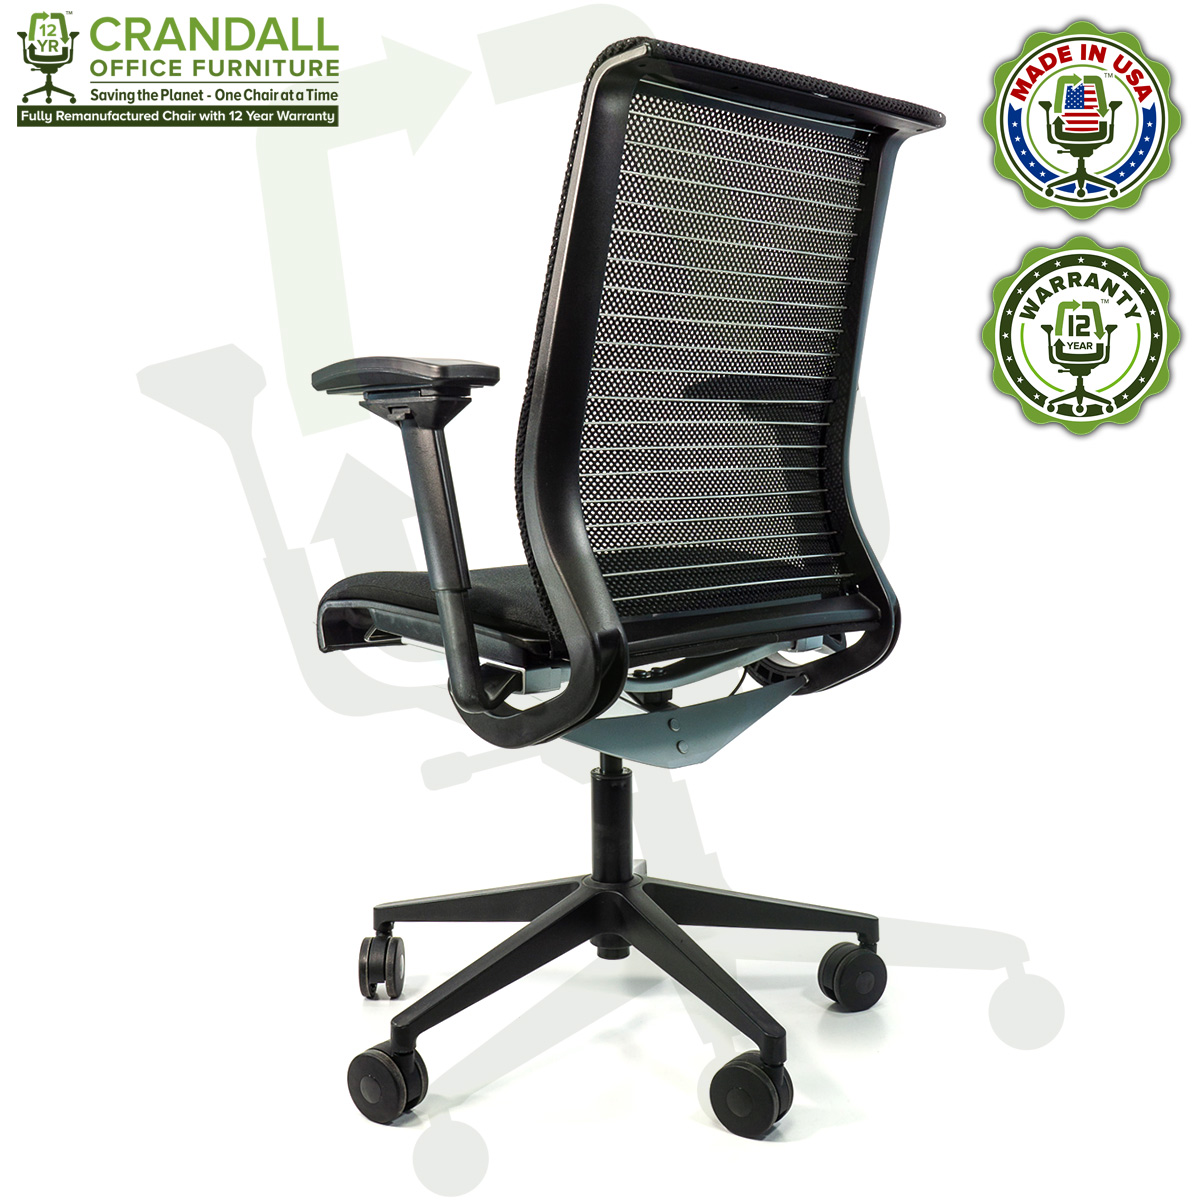 Crandall Office Furniture Remanufactured Steelcase Think Chair with 12 Year Warranty - 04